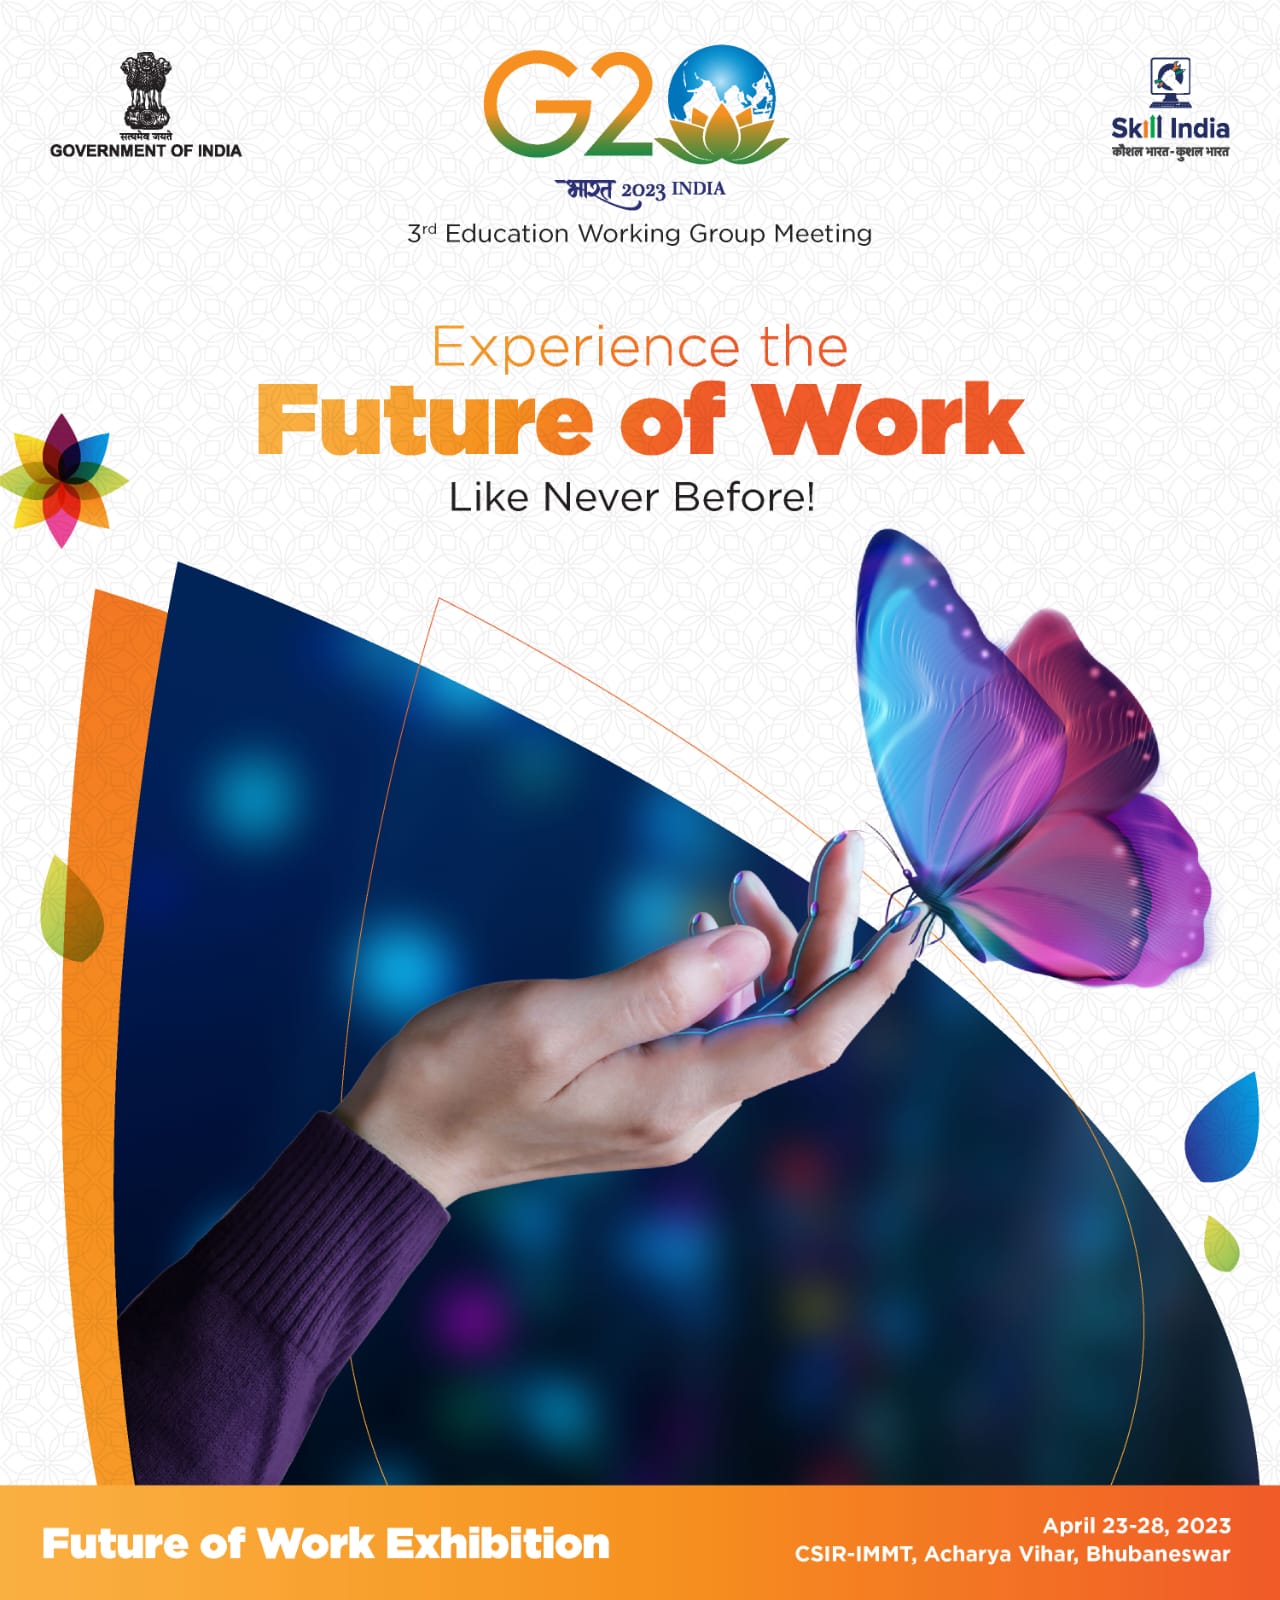 Are you curious about the impact of emerging technologies that will change the way you work in the future